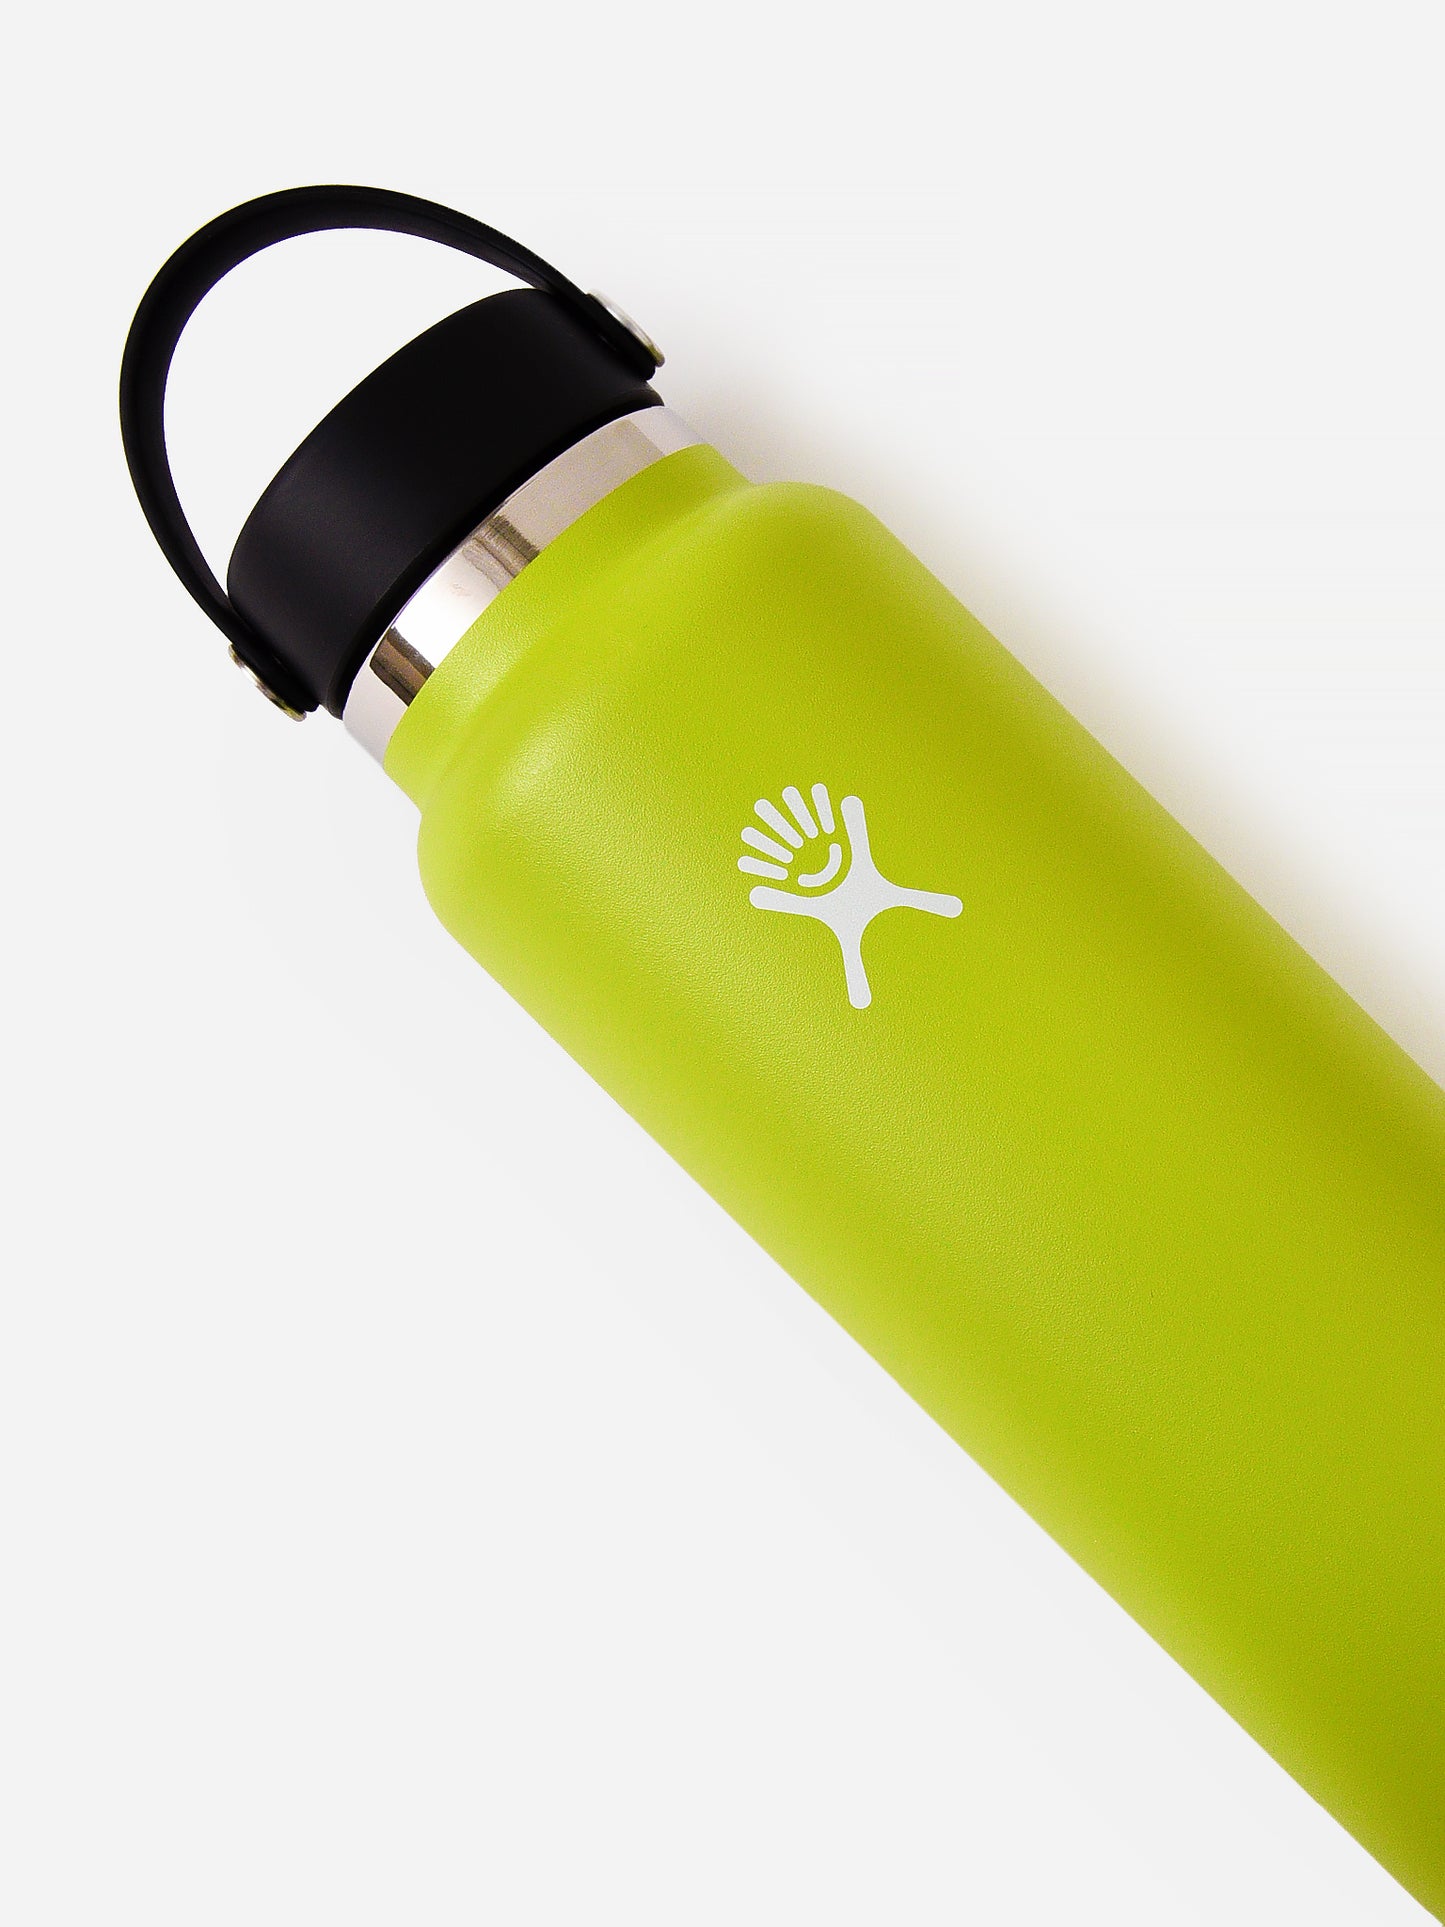 Hydroflask Wide Mouth 40oz Water Bottle